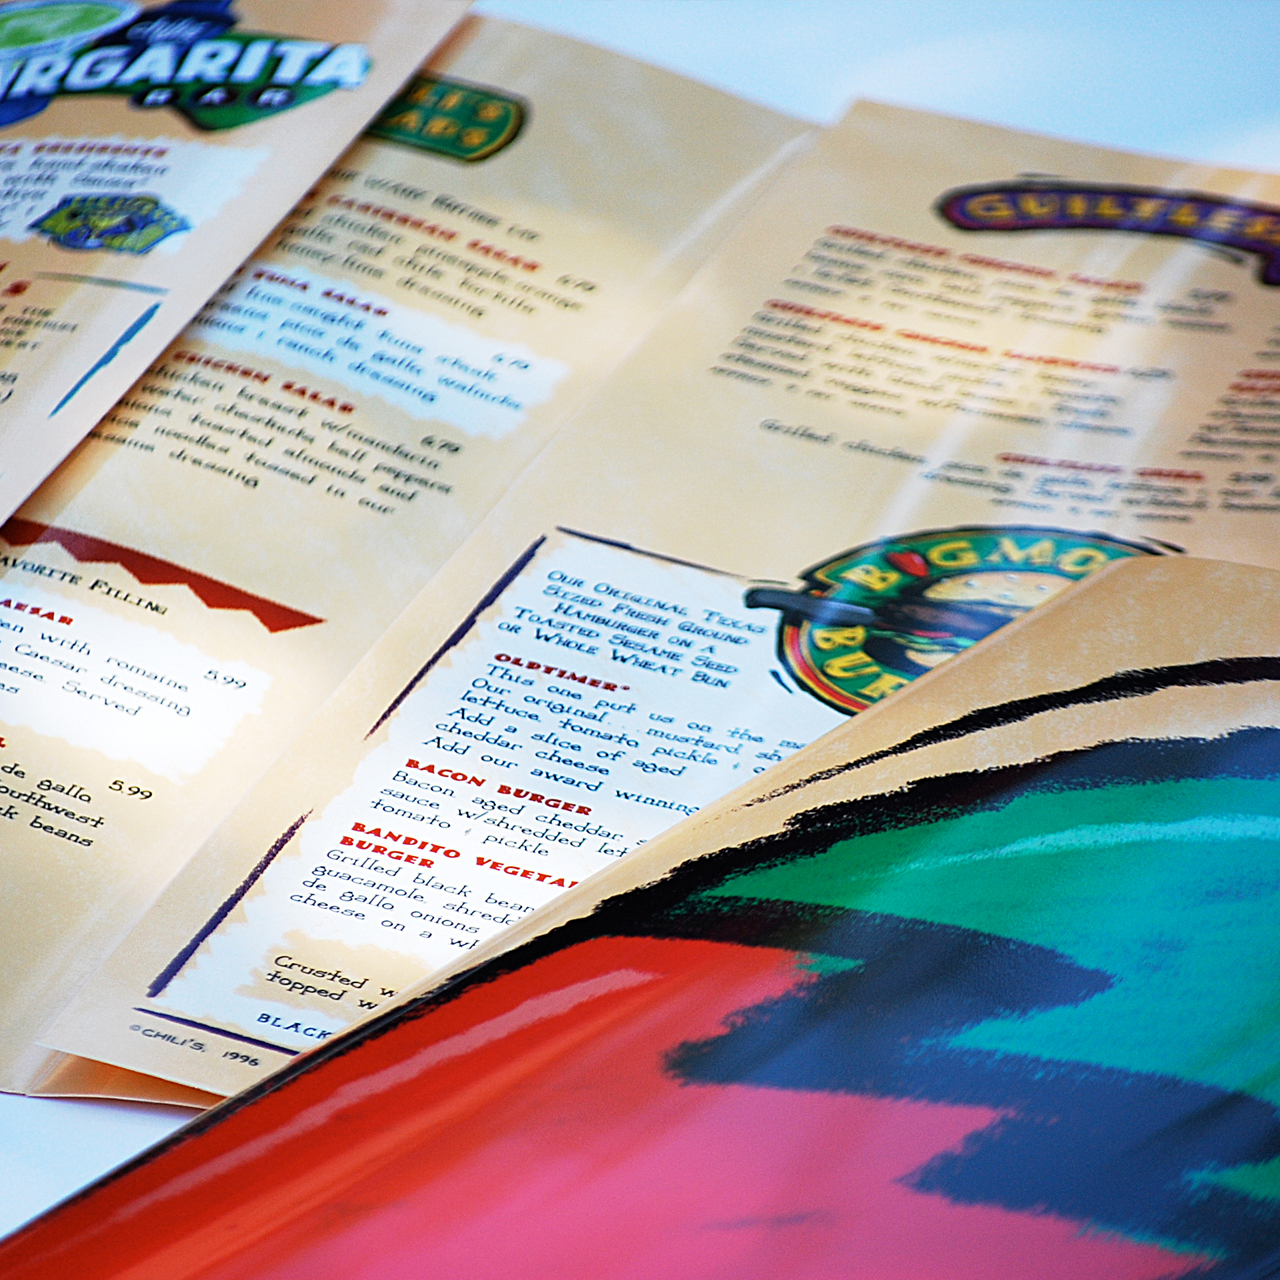 An image of the Chili's menu interior page design